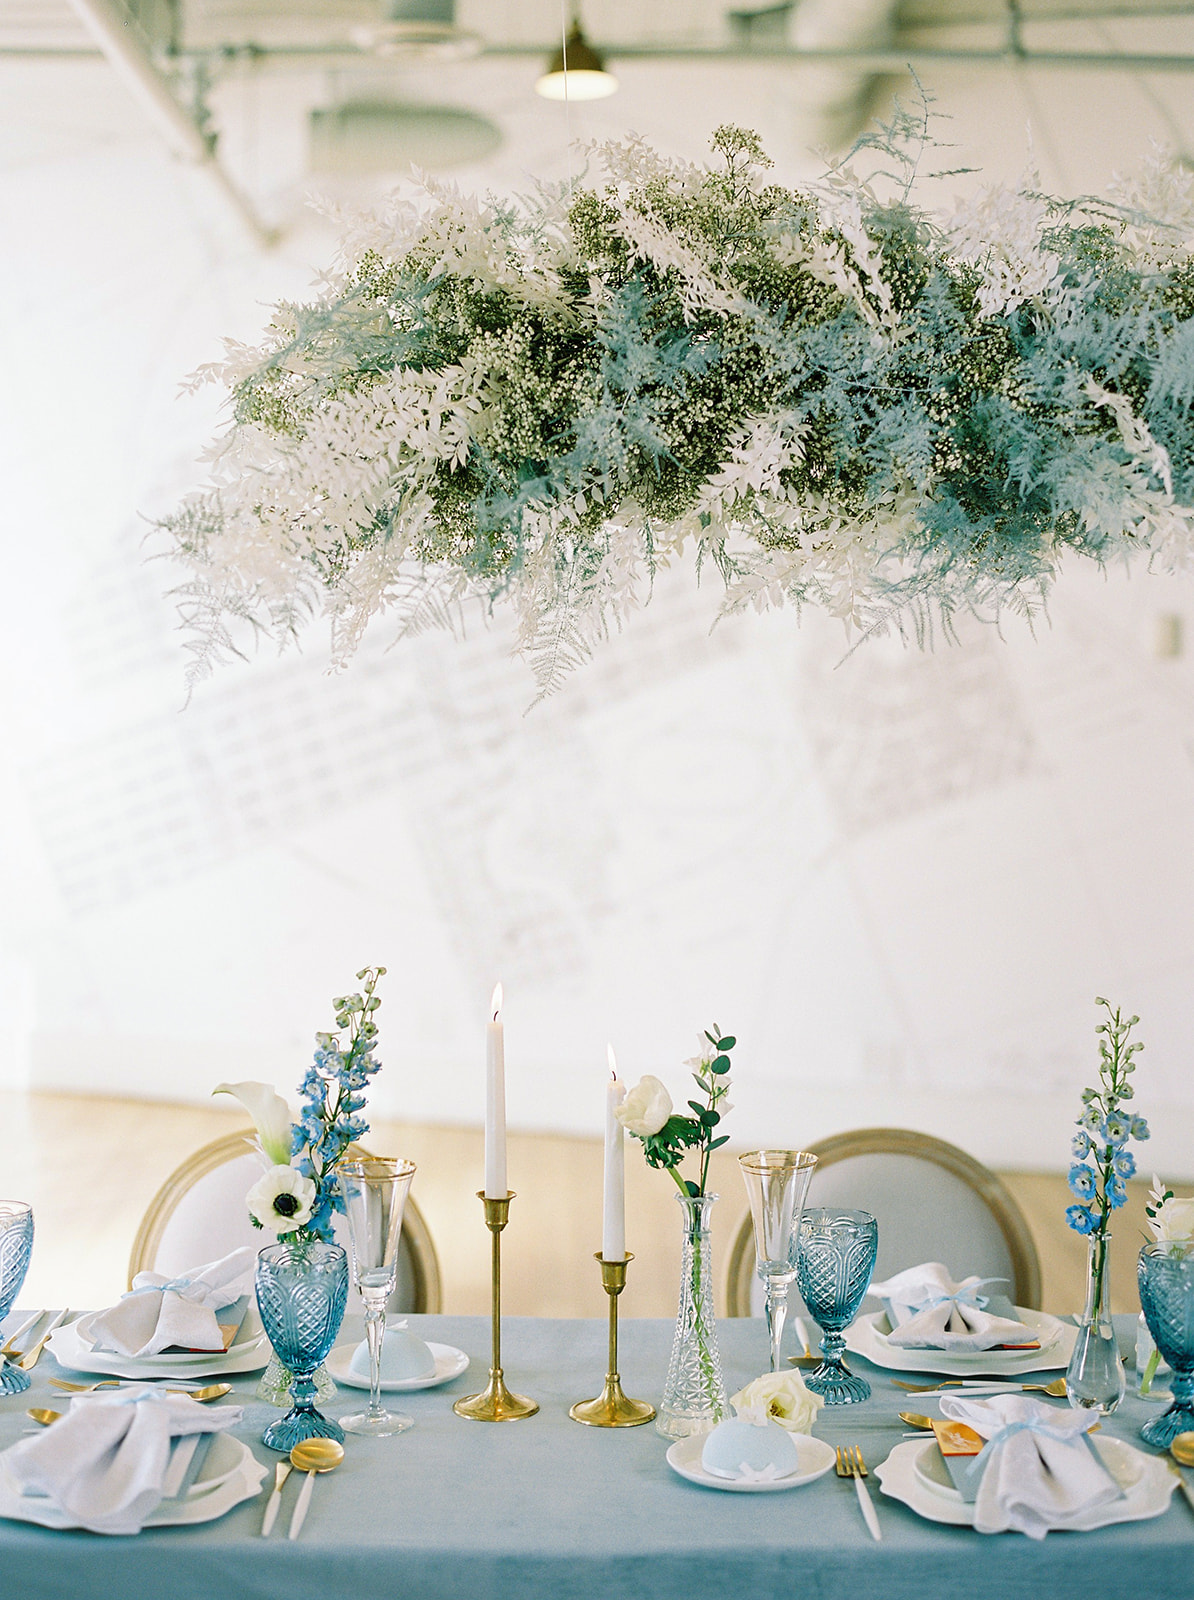 Craving a Paris Getaway? This Parisian Wedding Inspiration Will Transport You To a Quaint Town In France Featured by Brontë Bride, floral installation, tablescape, blue wedding